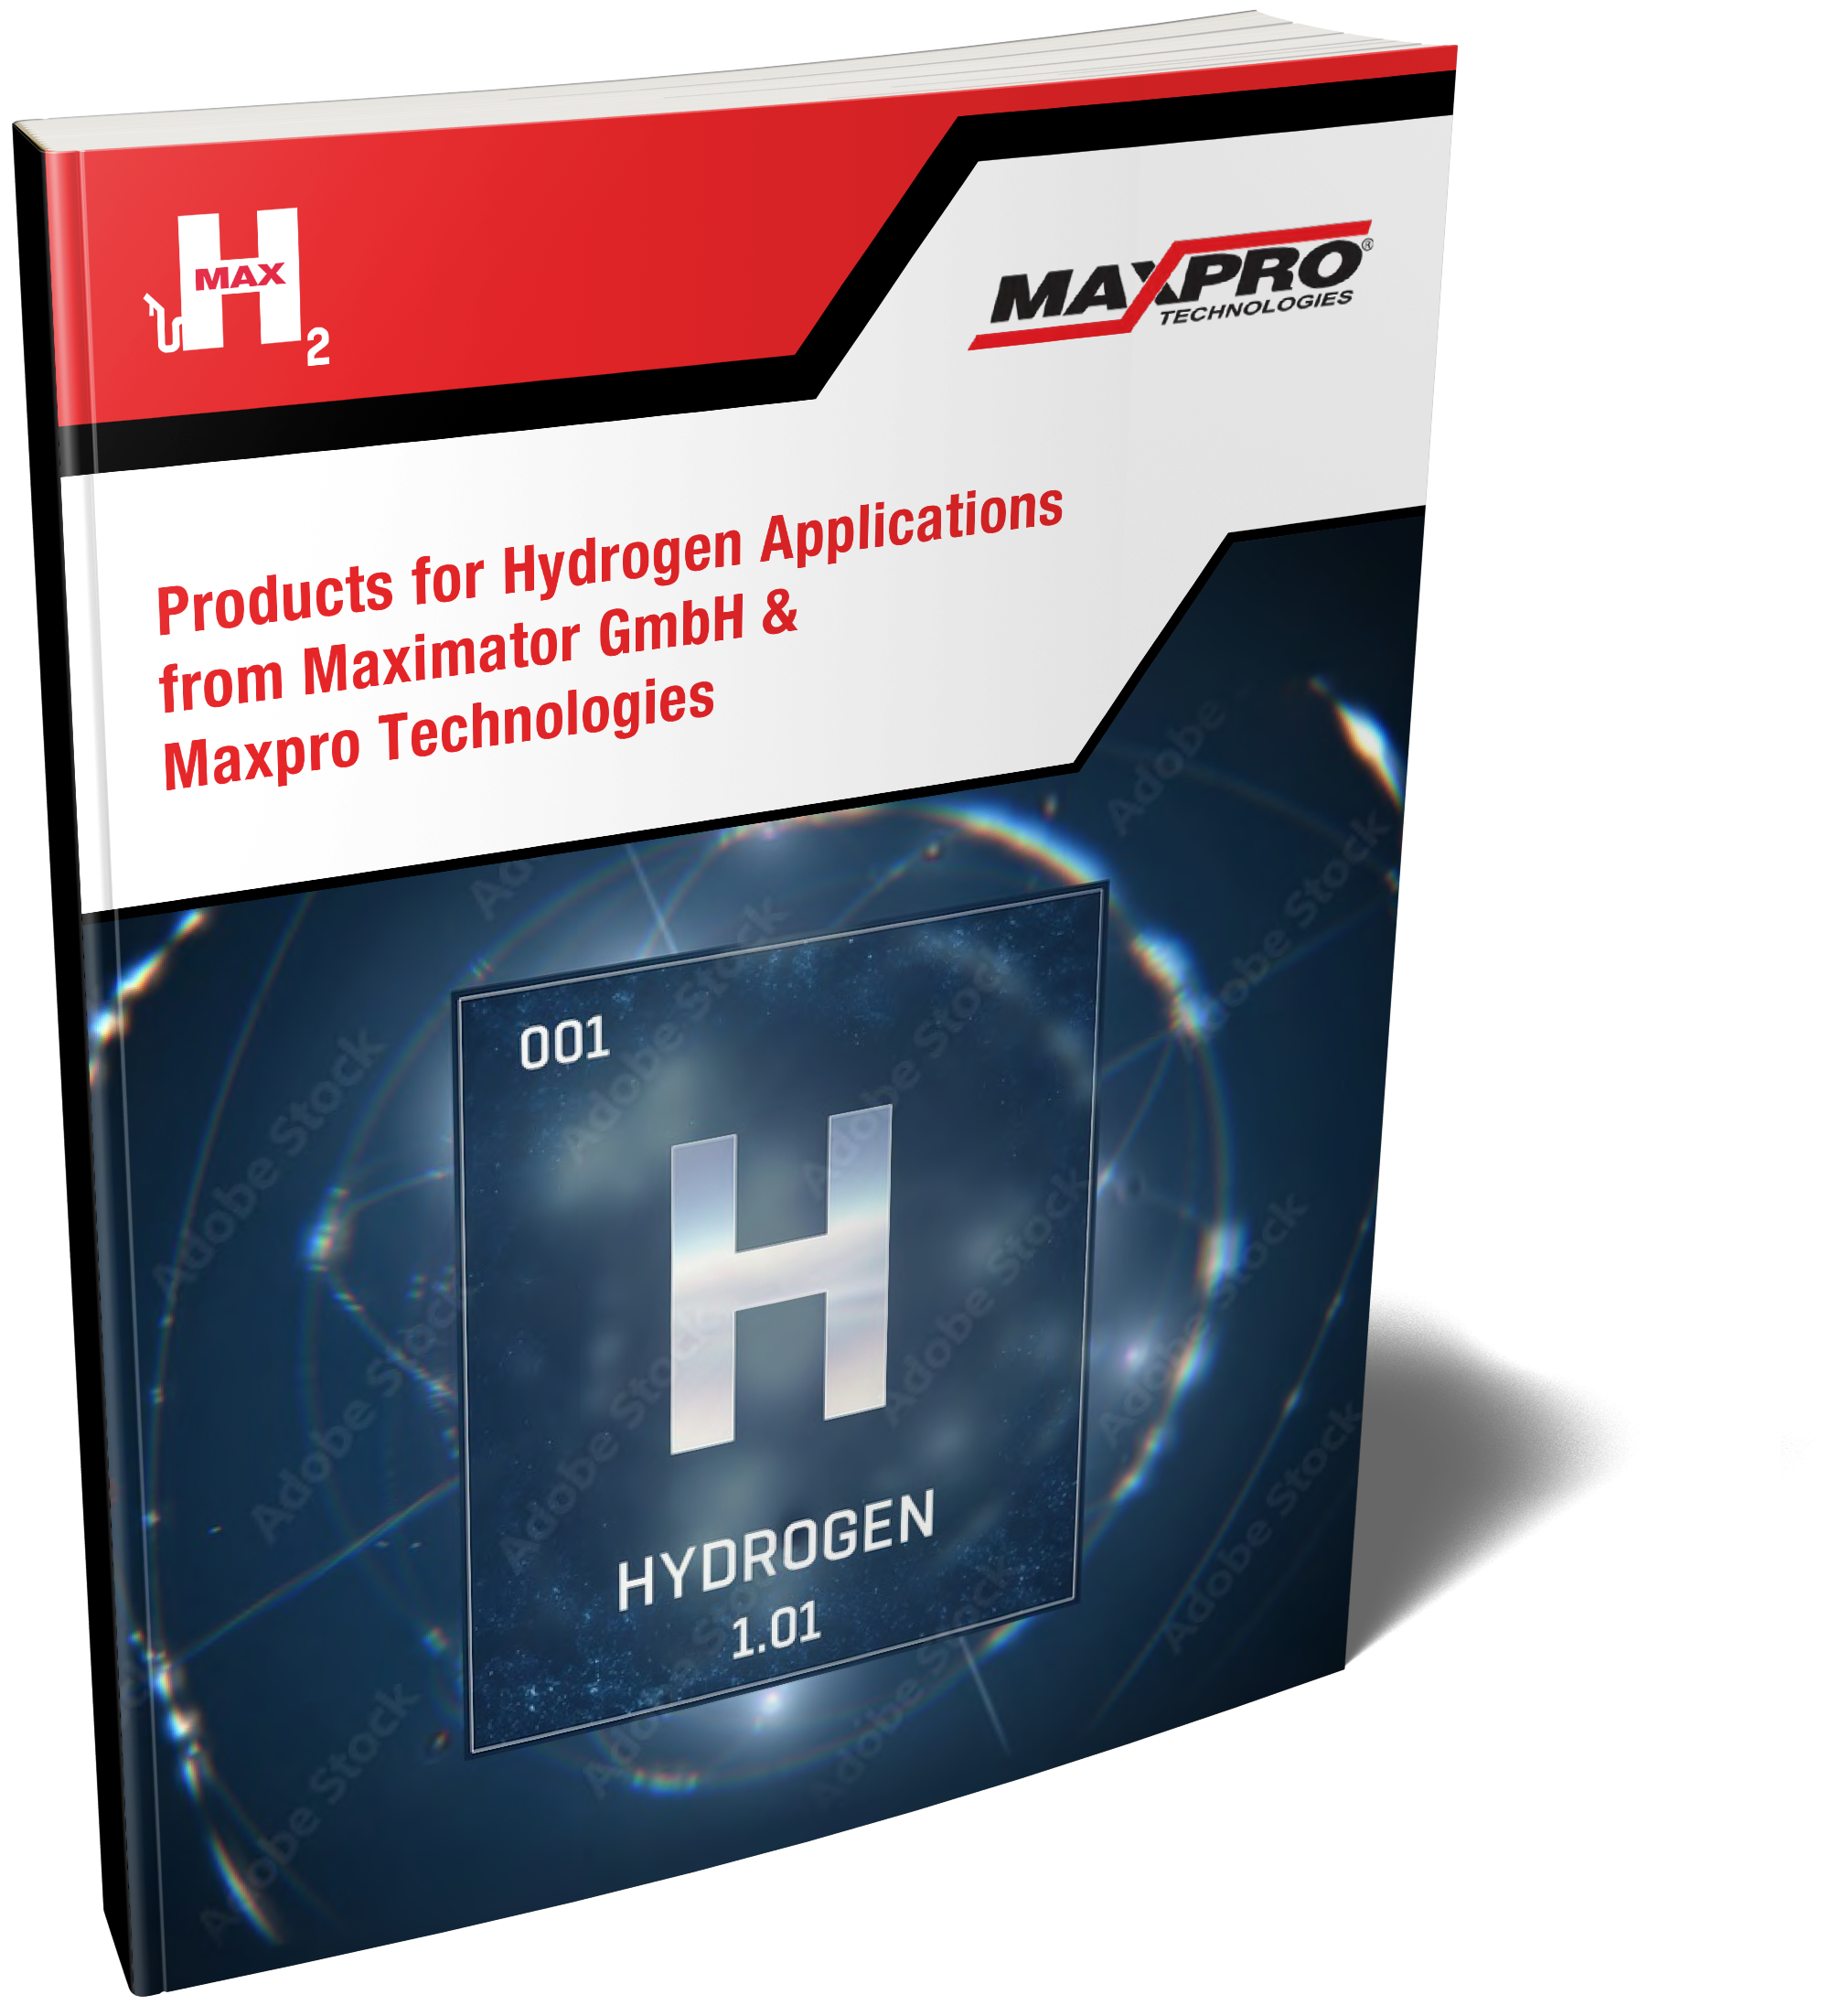 Products For Hydrogen Applications From Maximator Gmbh & Maxpro Technologies